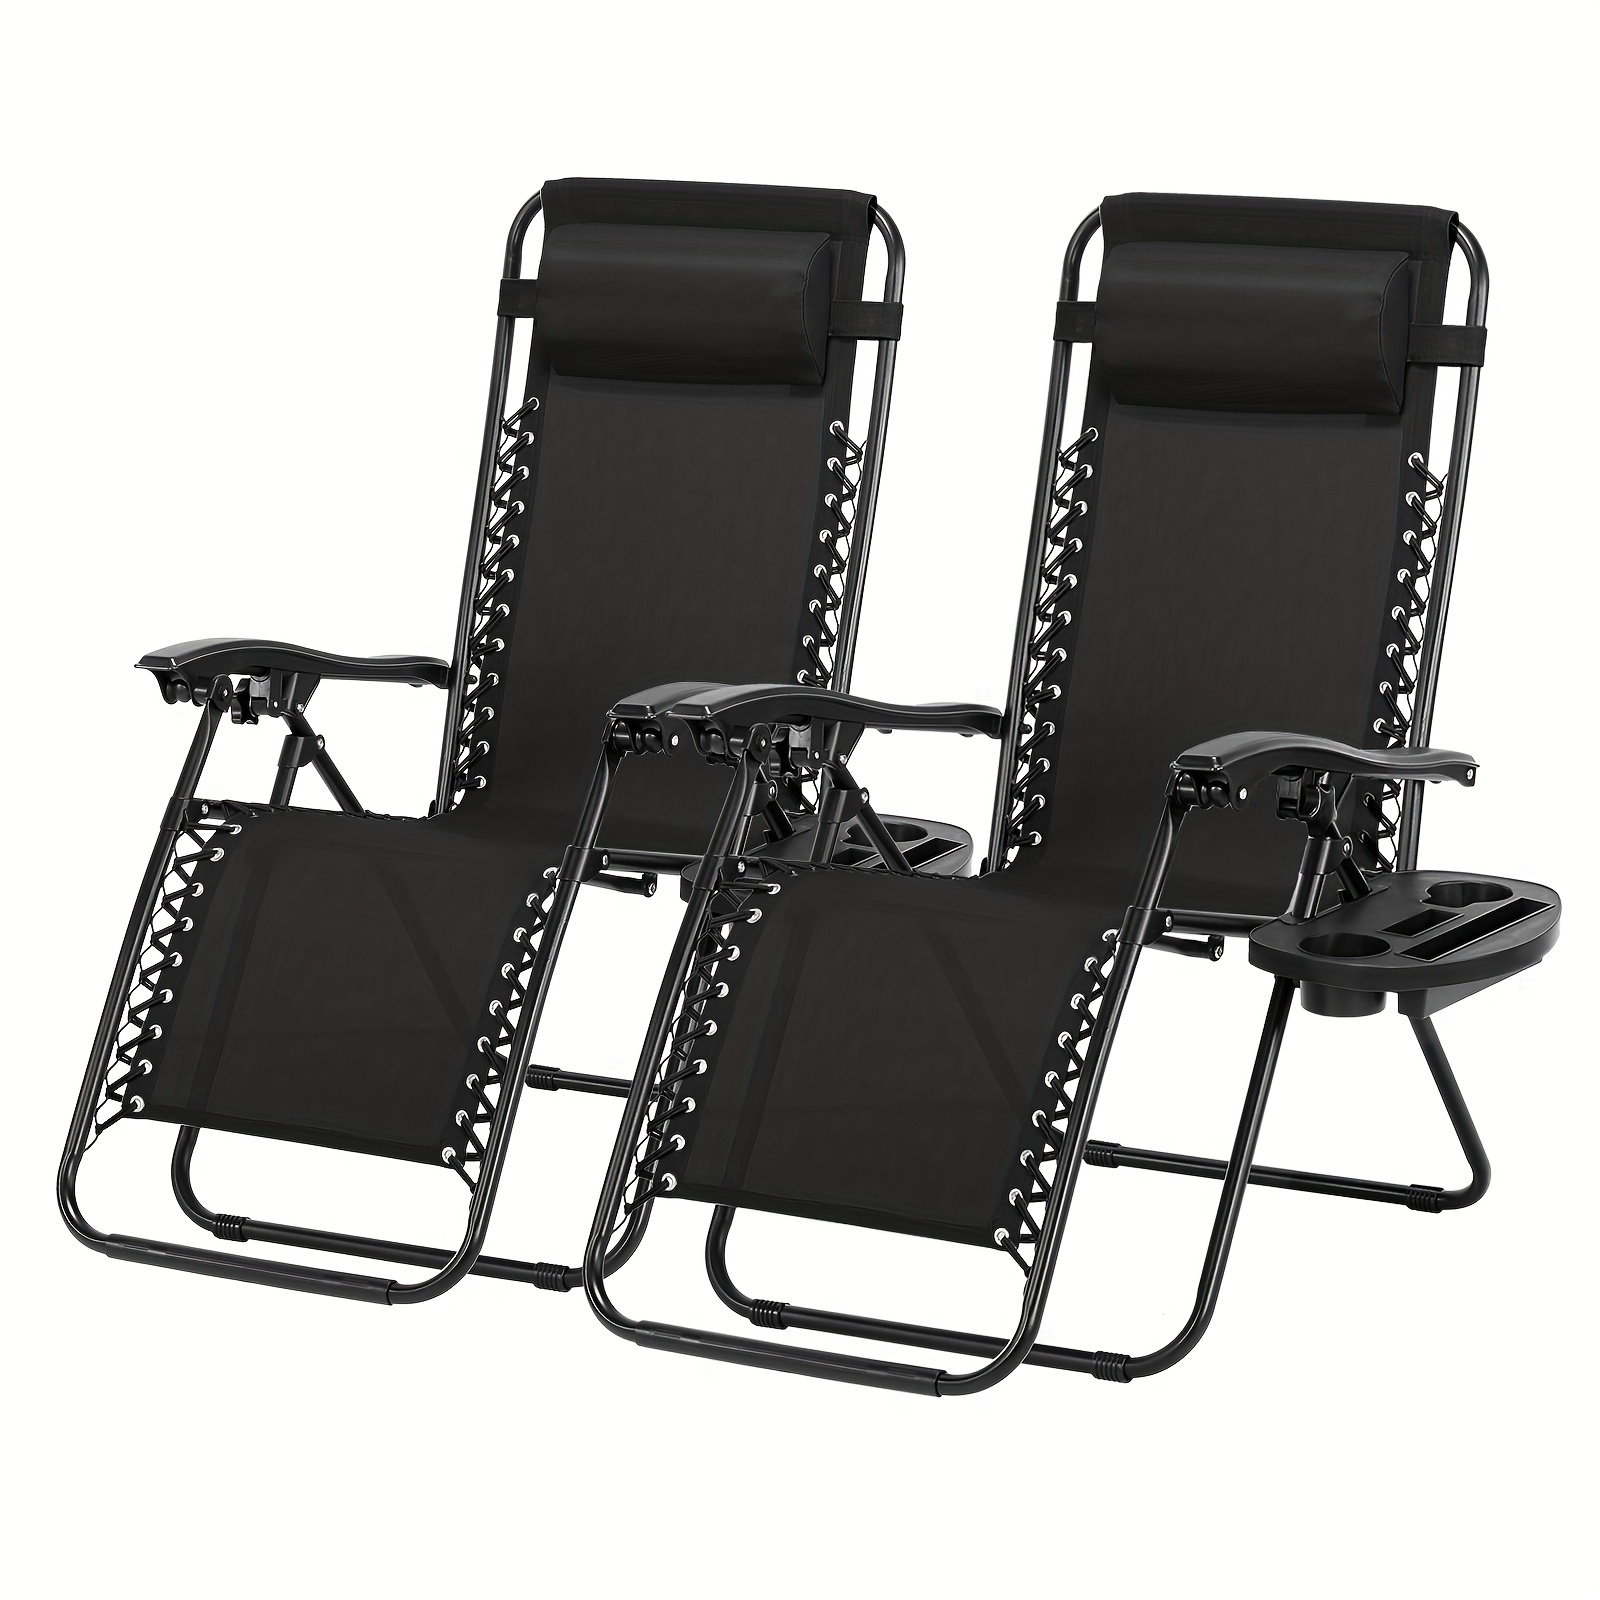 

Tomshoo Patio Recliner Chair Set Of 2 Folding Camping Chairs With Cup Holder Adjustable Headrest Reclining Lounge Chair For Poolside Backyard And Beach